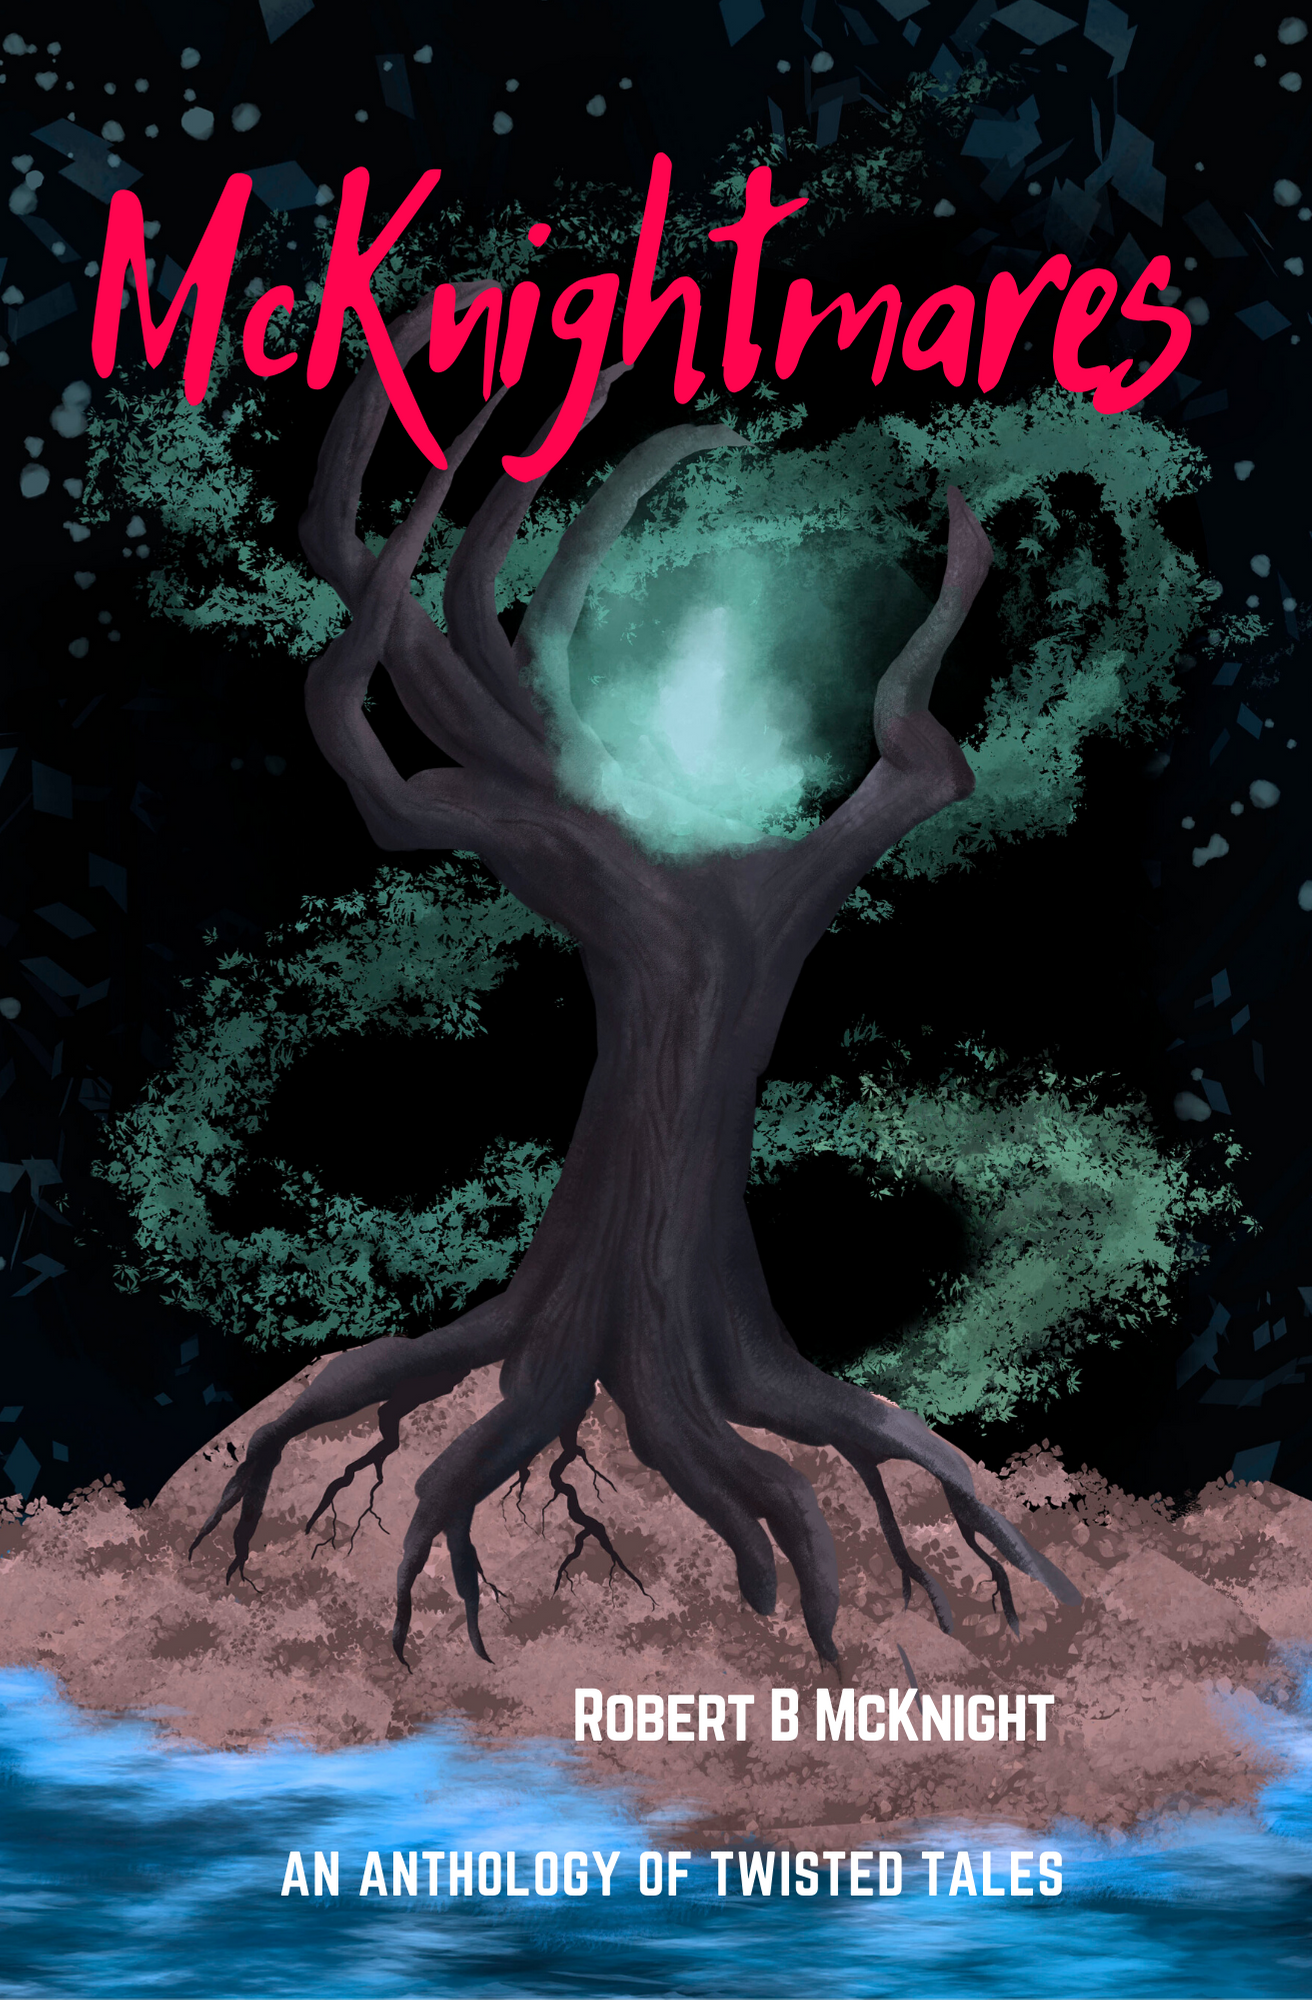 FREE: Mcknightmares: an Anthology of Twisted Tales by Robert McKnight by Robert McKnight